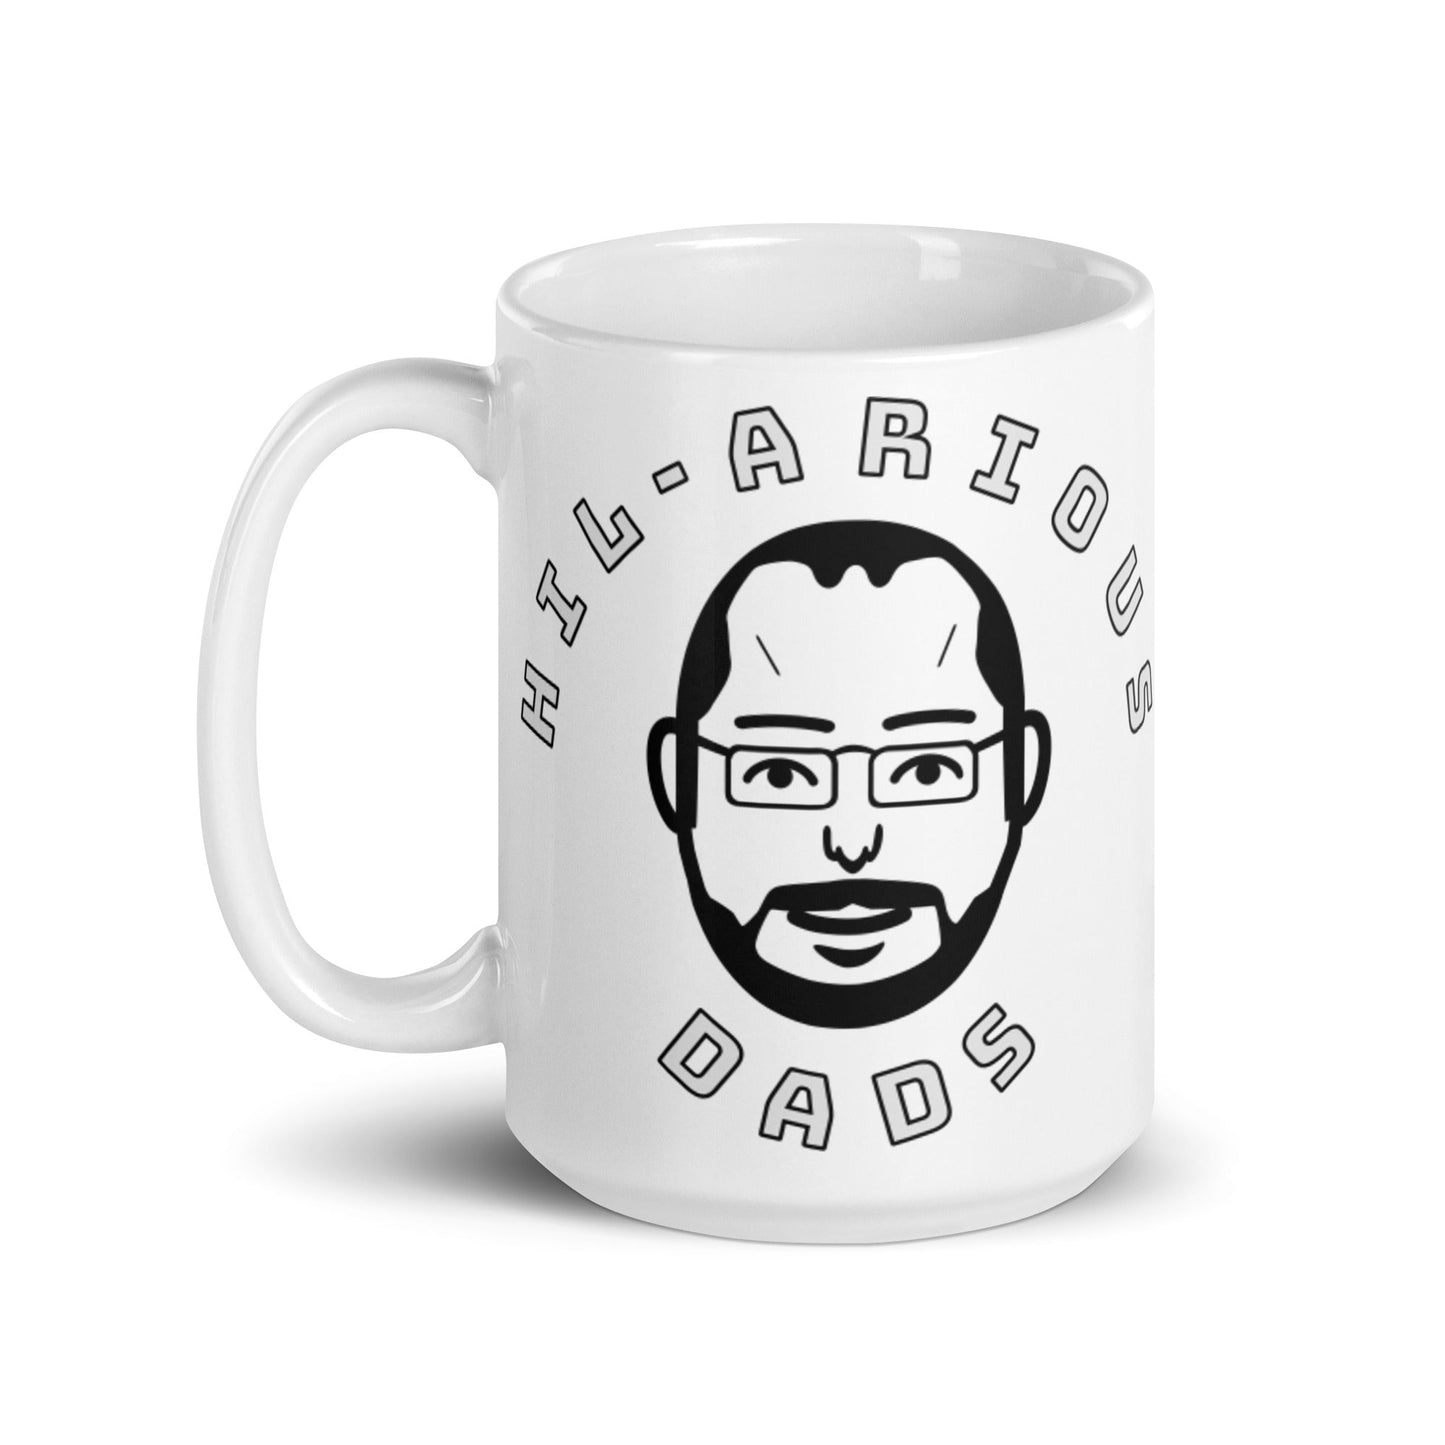 What should a father say to his daughter every day?-Mug - Hil-arious Dads